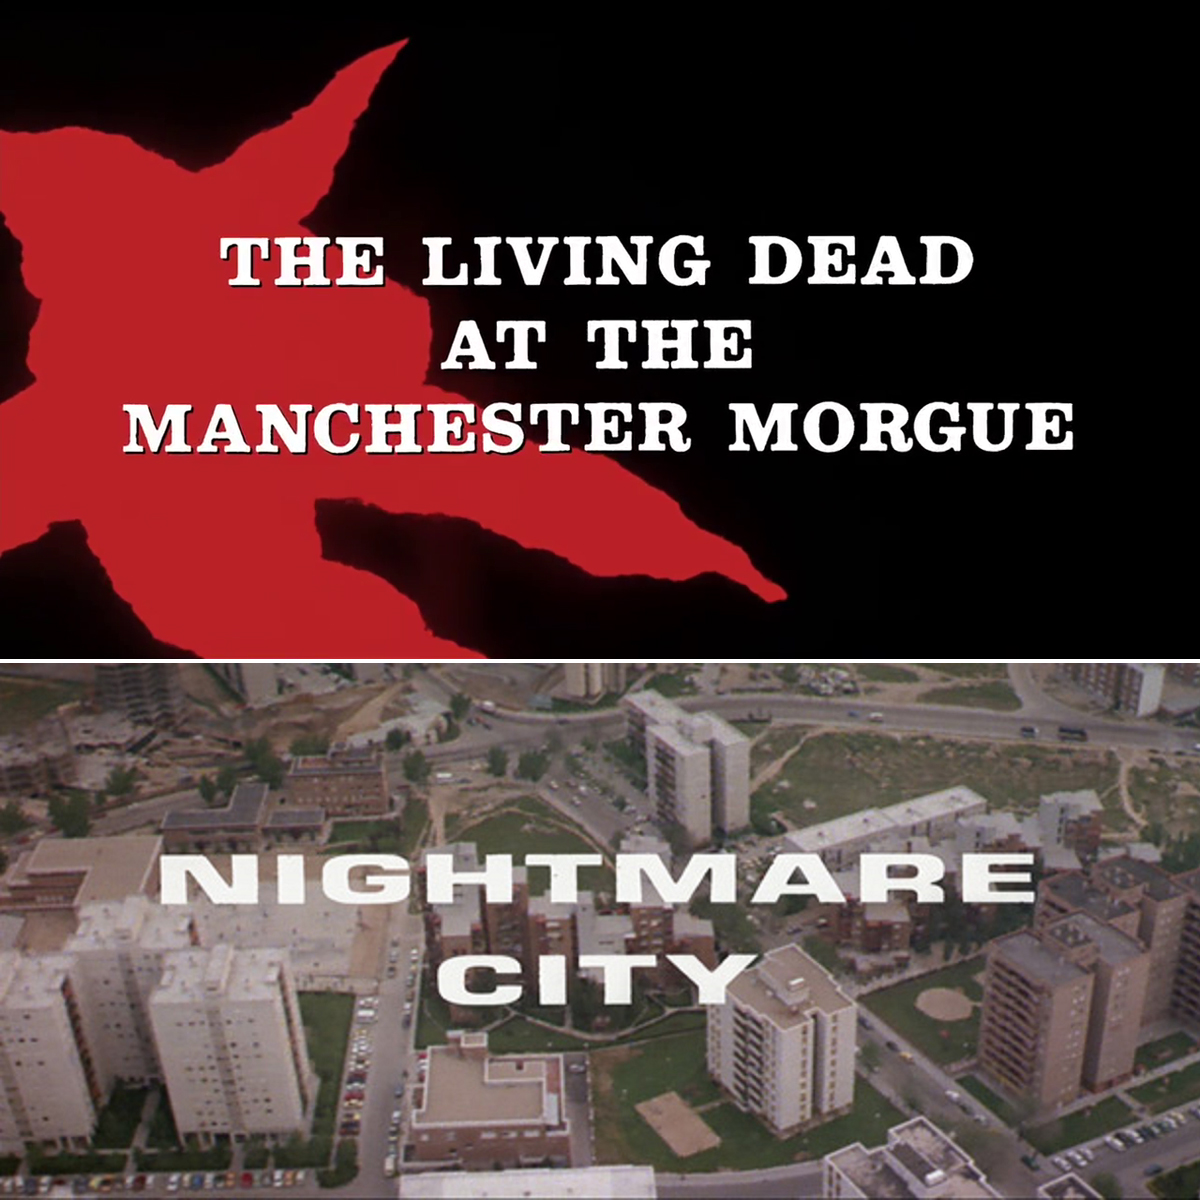 This month... @reelsteelcinema present a Zombie double-bill screening: The Living Dead at Manchester Morgue (1974) Nightmare City (1980) reelsteelcinema.com/tldnc/ a double-bill of horror classics, #Halloween weekend at #Sheffield's Abbeydale Picture House.